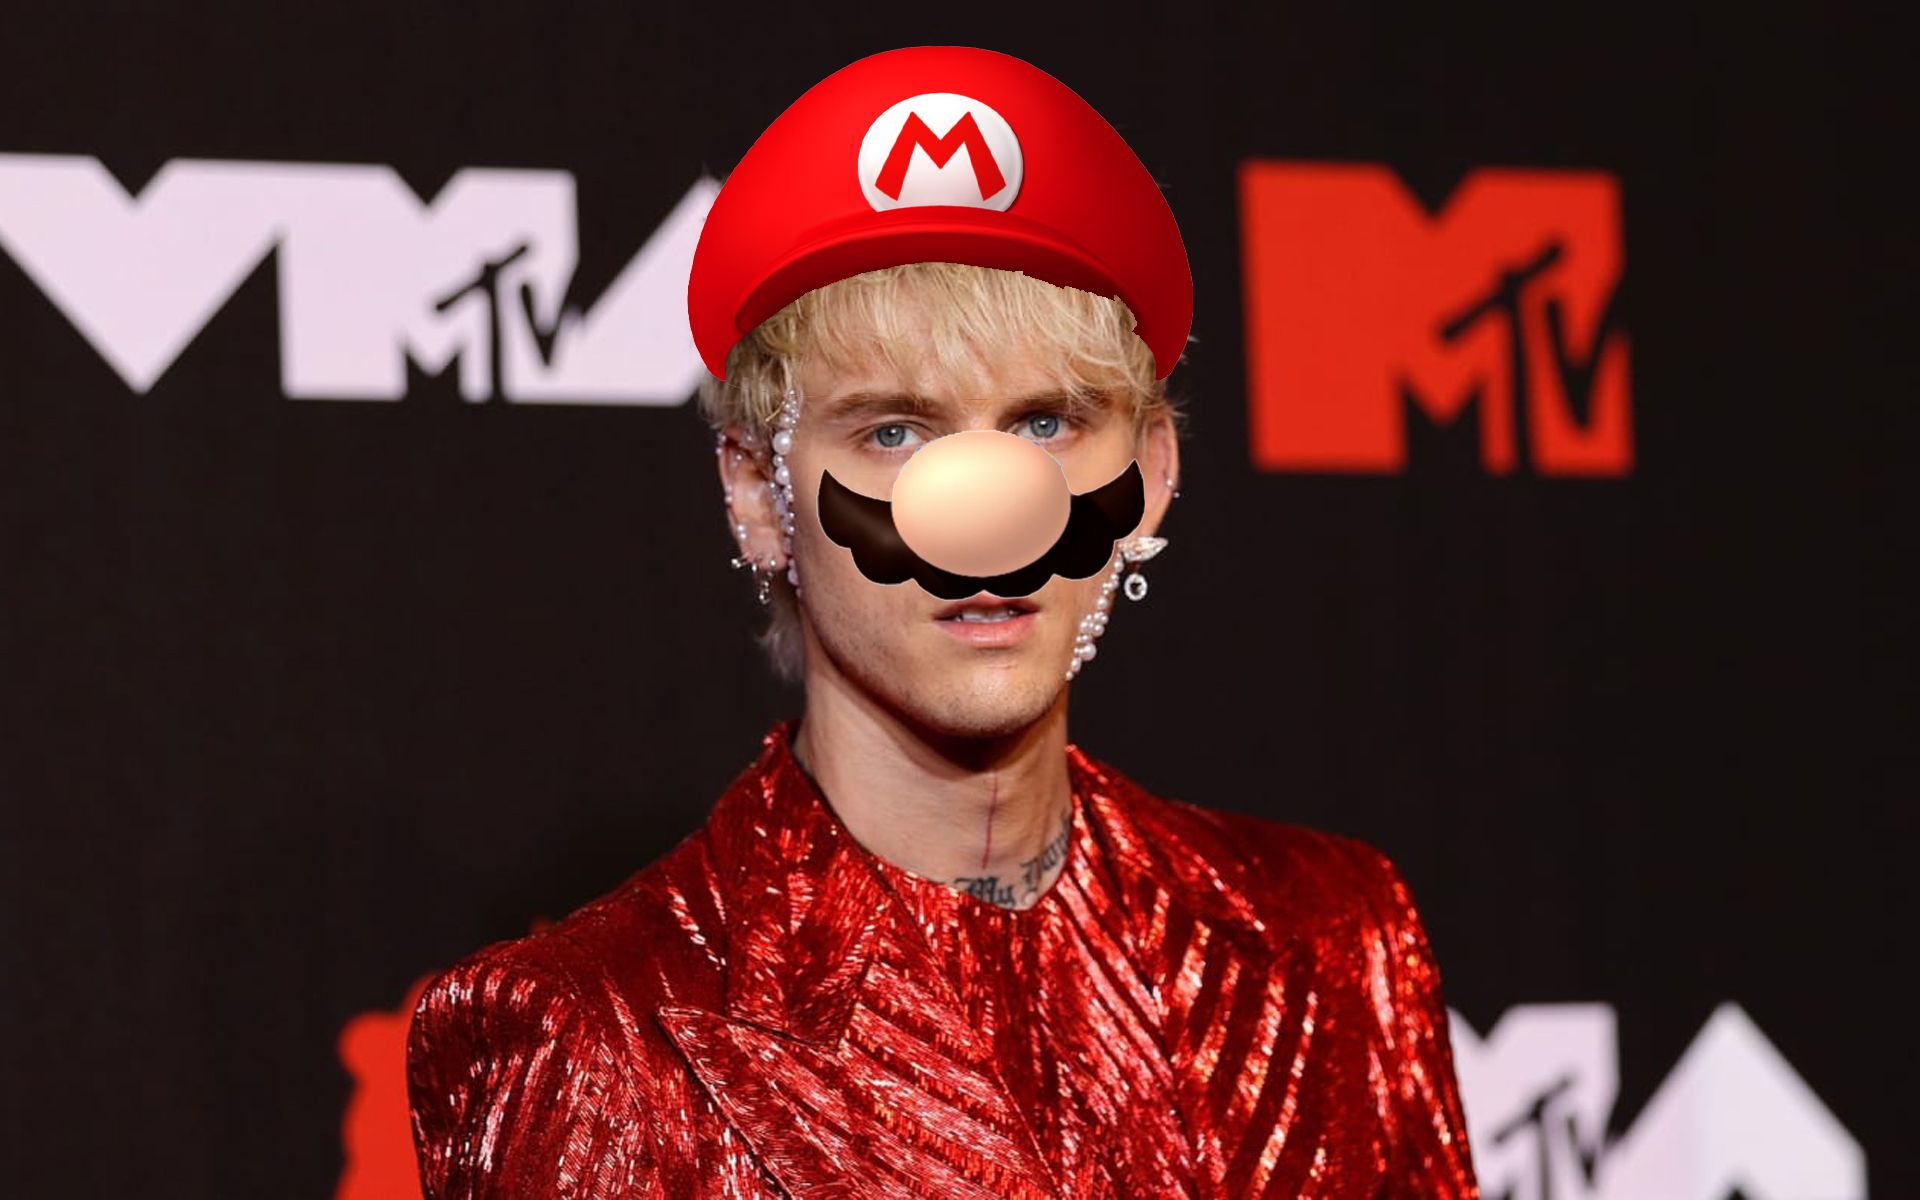 Machine Gun Kelly Declares Himself "Nintendo" After Being Turned Down For Upcoming Mario Movie